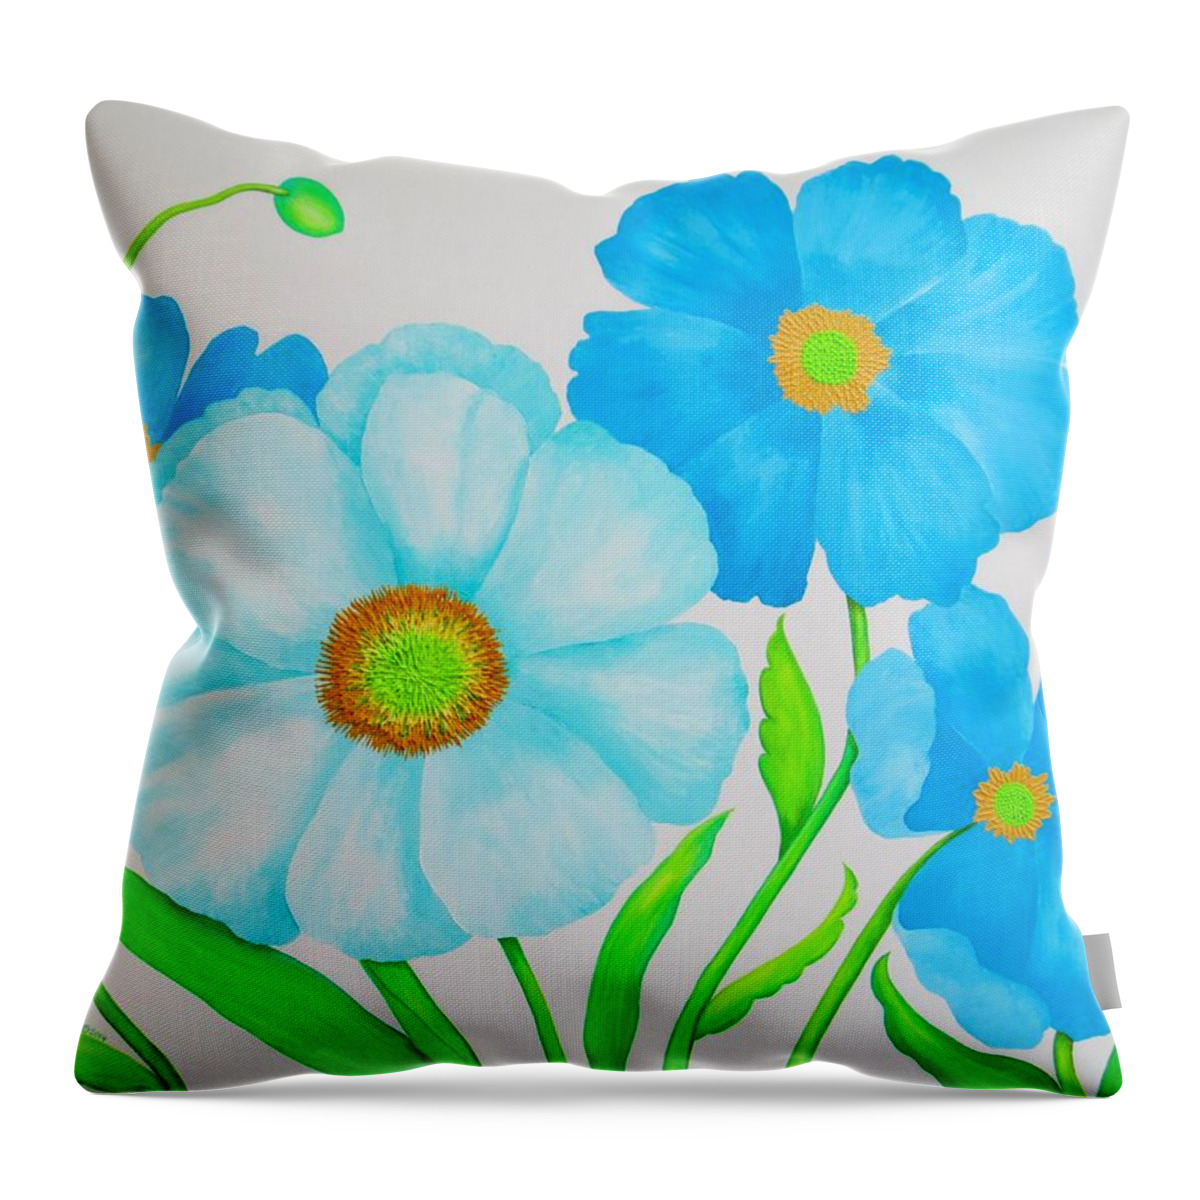 Flowers Throw Pillow featuring the painting Cornflowers by Carol Sabo